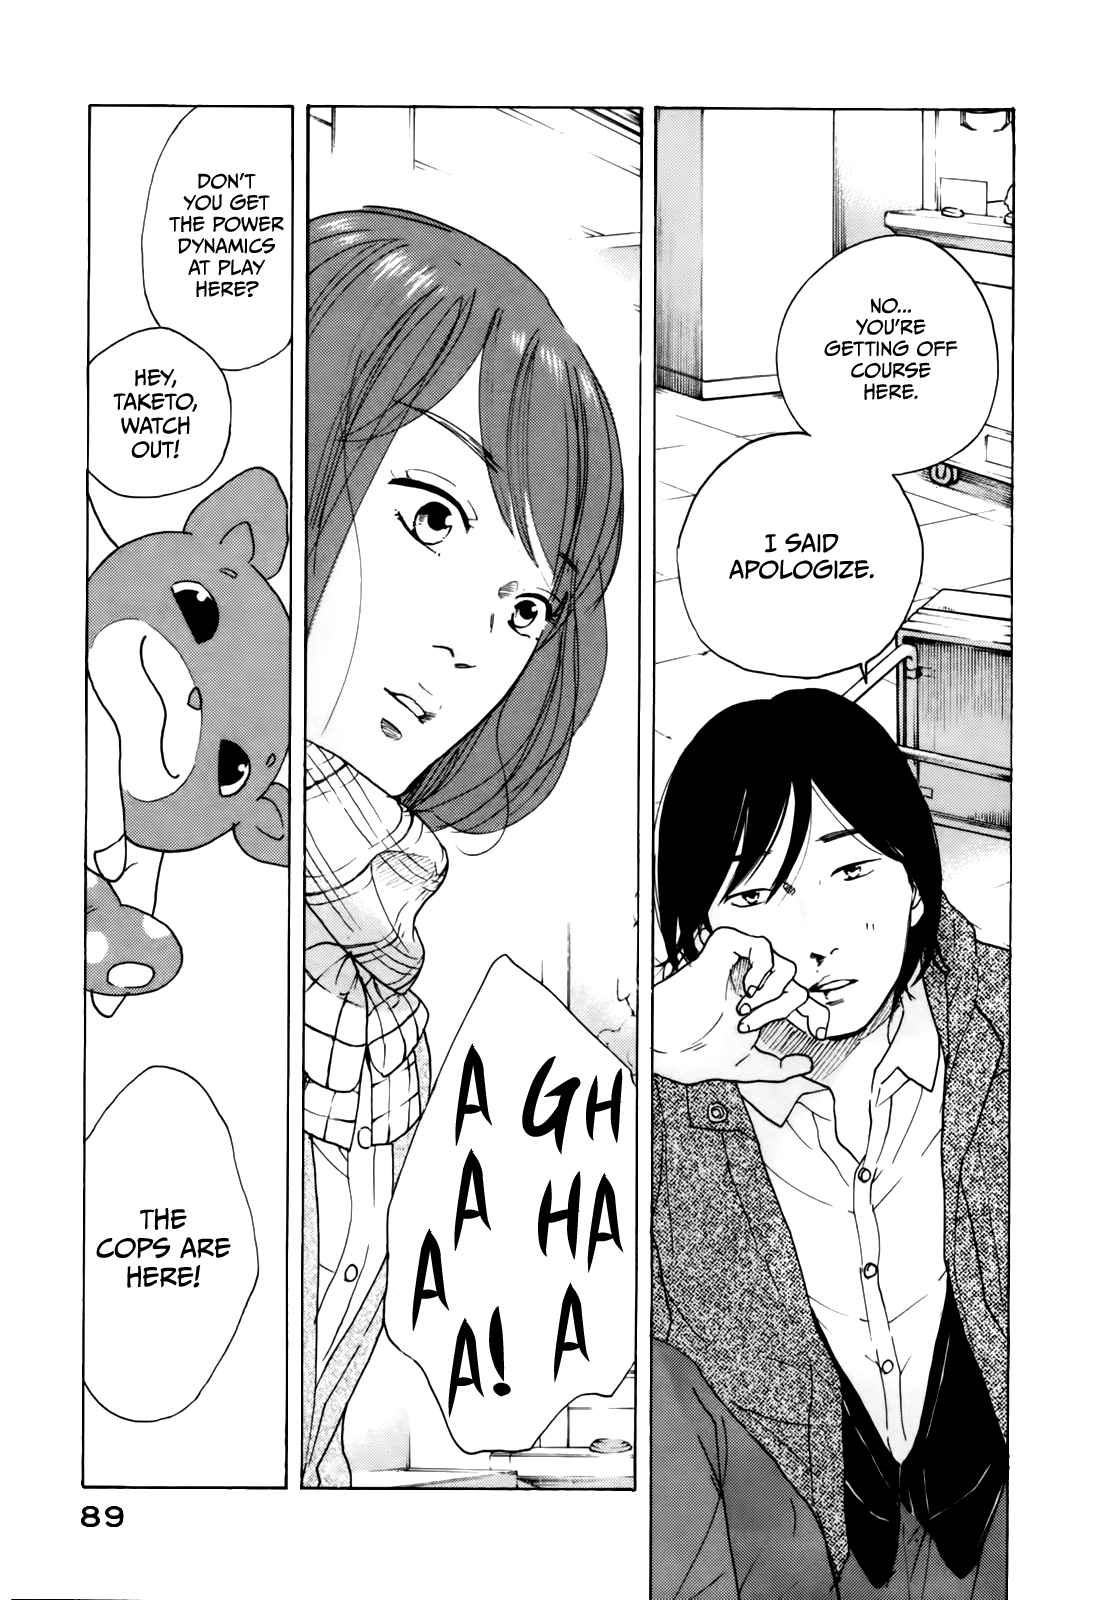 Sensei no Shiroi Uso Vol. 6 Ch. 34 Carrying the Anger That Won't Disappear Underfoot